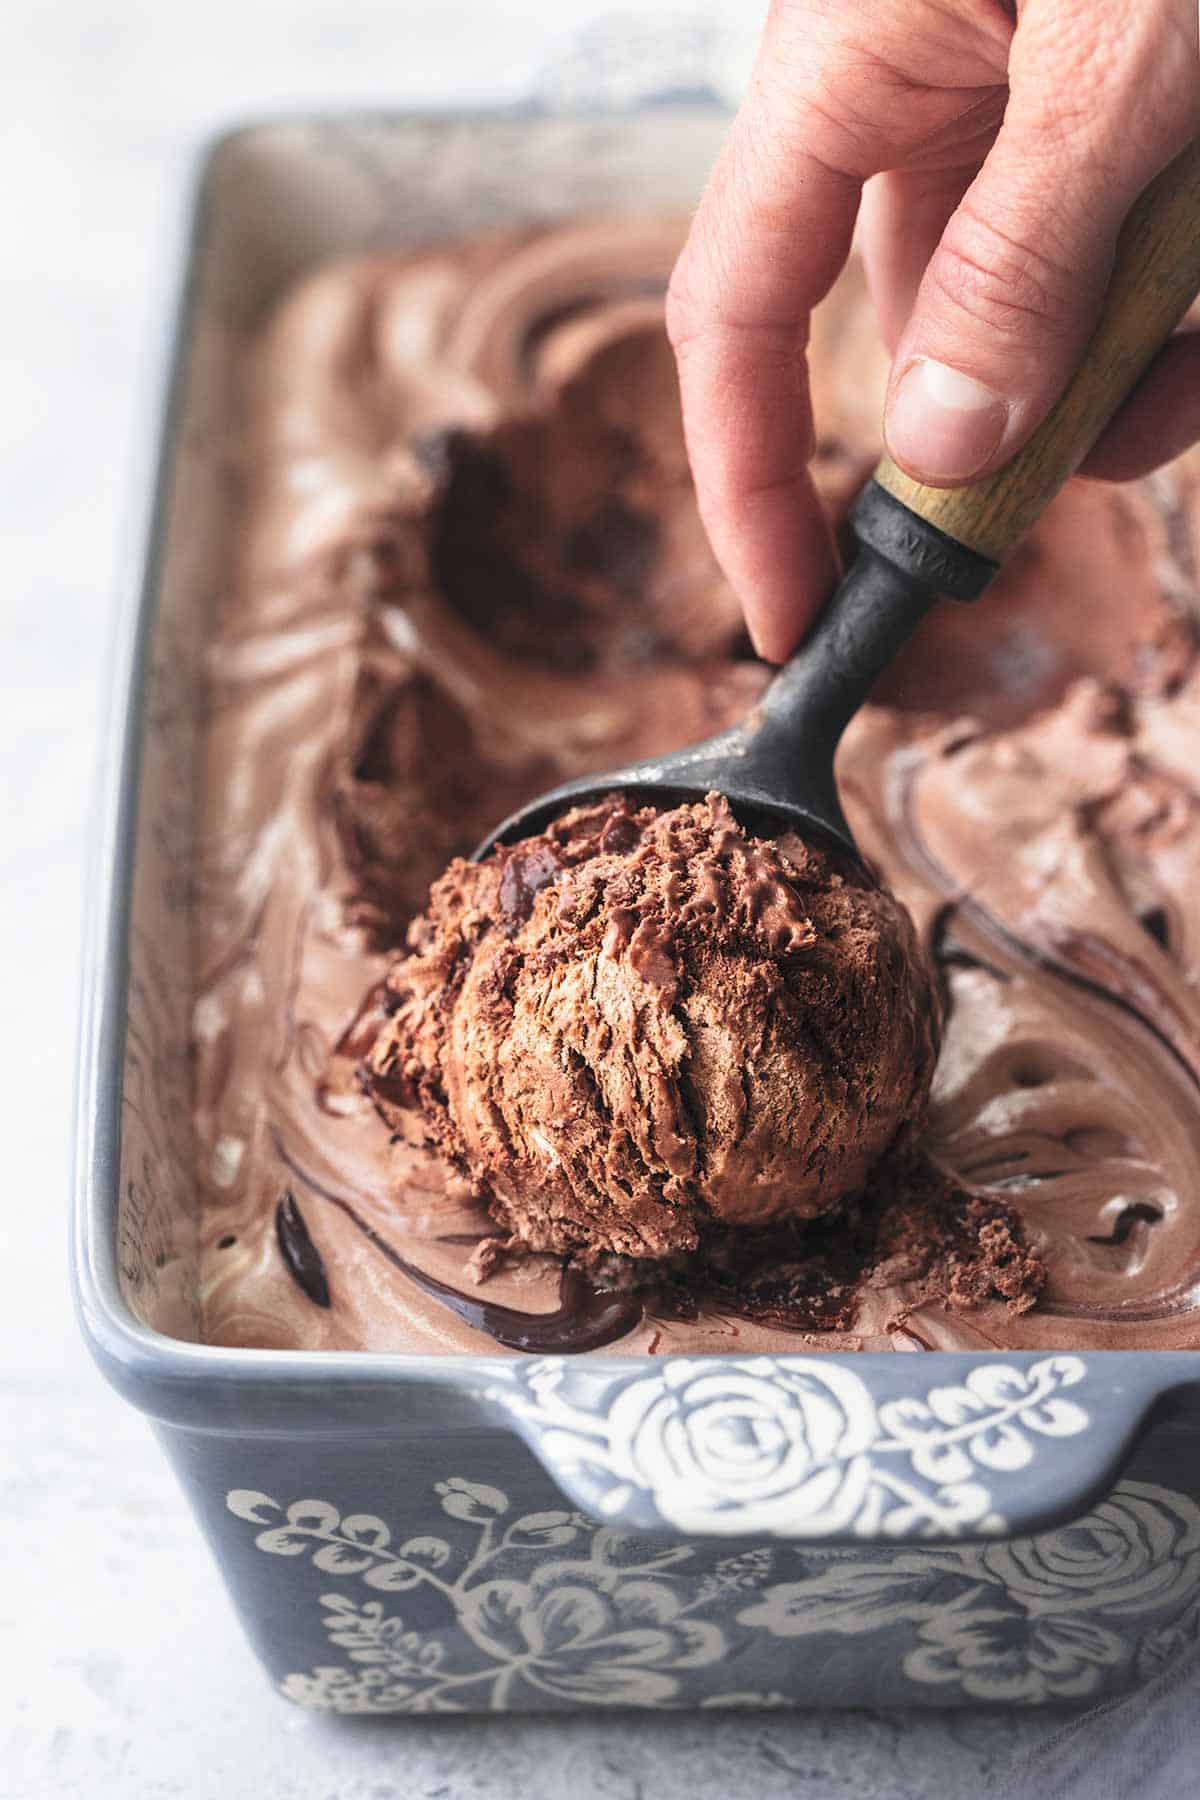 close up of a hand scooping fudge ripple chocolate ice cream with an ice cream scooper.